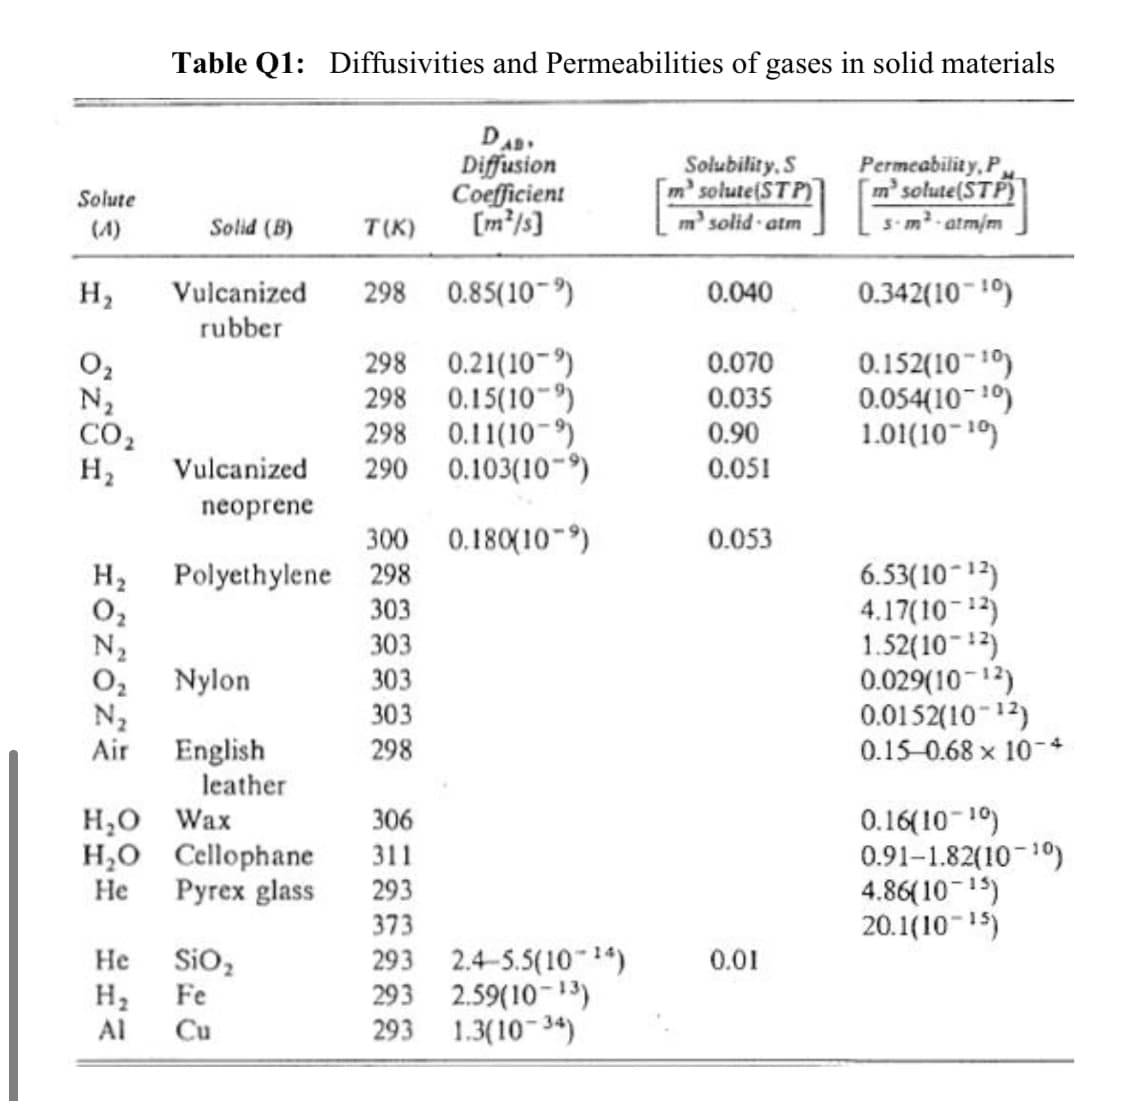 Table Q1: Diffusivities and Permeabilities of gases in solid materials
DAD
Diffusion
Coefficient
[m*/s]
Solubility, S
m' solute(STP)
m' solid atm
Permeability, P
m' solute(STP)
5-m- atm/m
Solute
(4)
Solid (B)
T(K)
H,
Vulcanized
298 0.85(10-)
0.040
0.342(10 10)
rubber
O2
N2
CO2
H2
298 0.21(10-)
298 0.15(10-)
298 0.11(10-9)
290 0.103(10-9)
0.152(10 10)
0.054(10-10)
1.01(10-1)
0.070
0.035
0.90
Vulcanized
0.051
neoprene
300 0.180(10-)
0.053
Polyethylene 298
303
6.53(10-12)
4.17(10-12)
1.52(10-12)
0.029(10-12)
0.0152(10-12)
0.15-0.68 x 10-
H2
303
Nylon
303
303
N2
Air
298
English
leather
H,O Wax
H,O Cellophane
He Pyrex glass
0.16(10-10)
0.91-1.82(10-10)
4.86(10-15)
20.1(10-15)
306
311
293
373
SiO,
H2
293 2.4-5.5(10-14)
293 2.59(10-13)
293 1.3(10-34)
Не
0.01
Fe
Al
Cu
